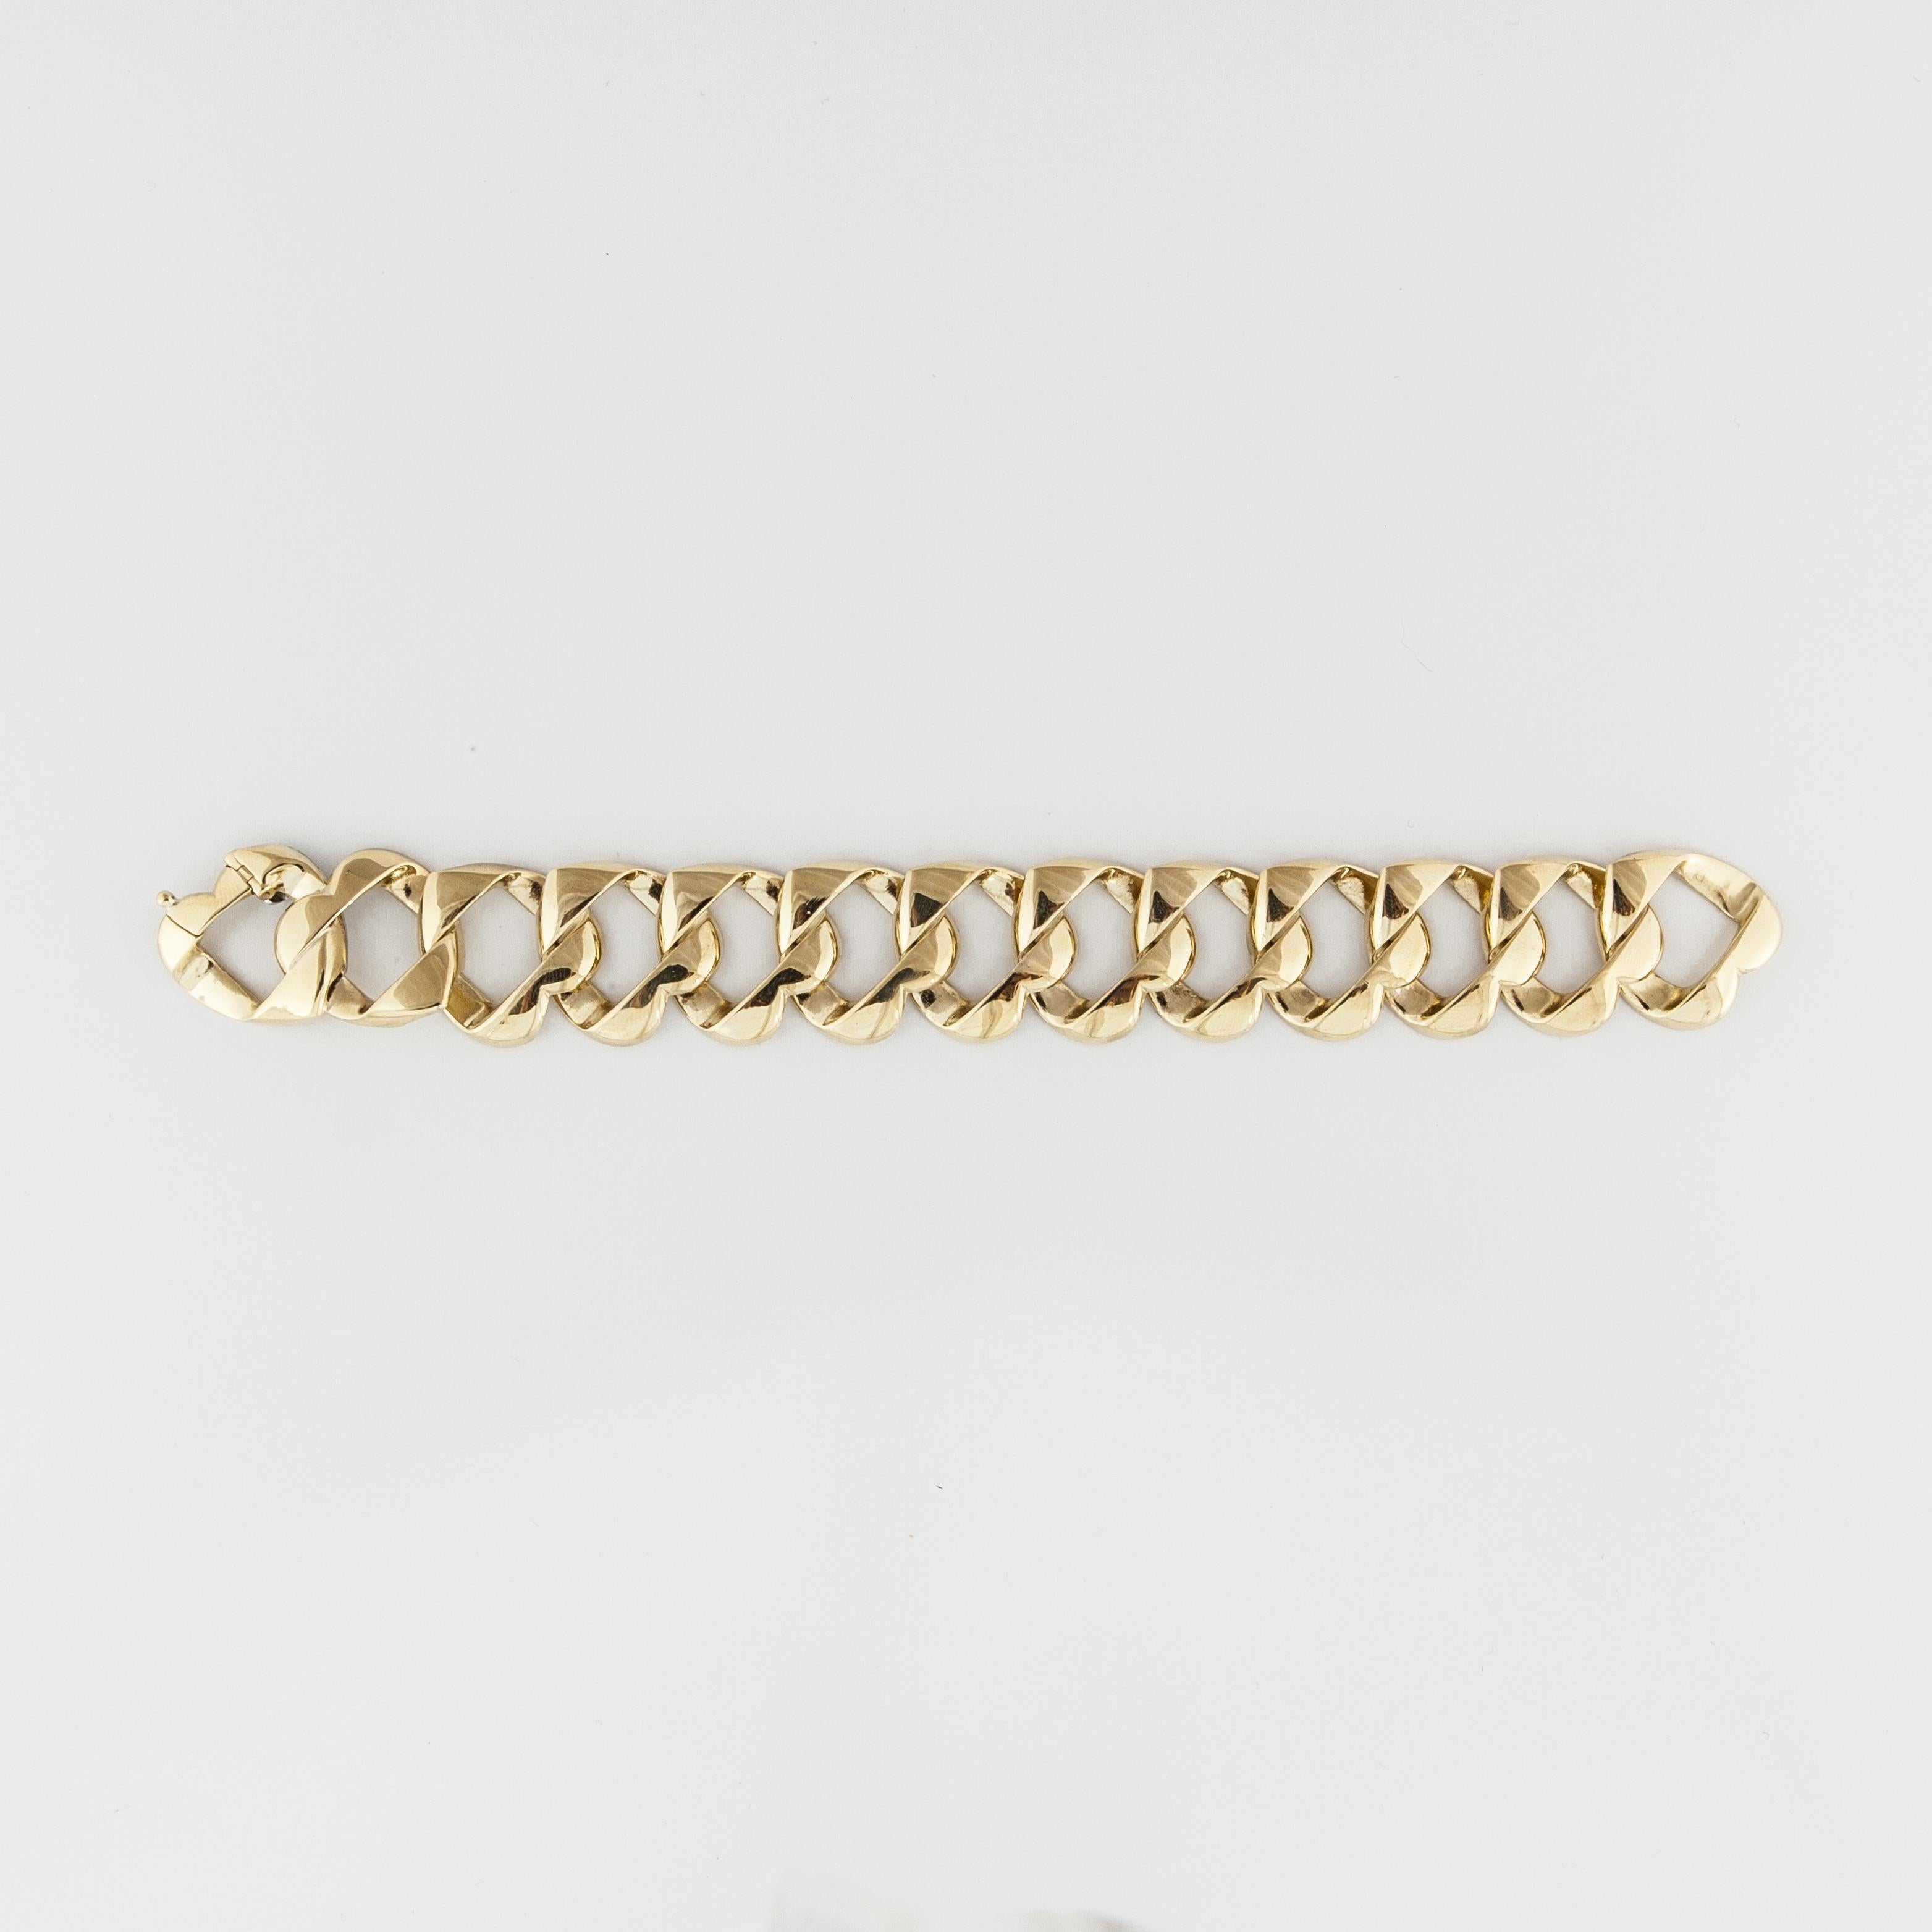 Tiffany & Co. 18K yellow gold bracelet.  The links are interlocking hearts.  Measures 8